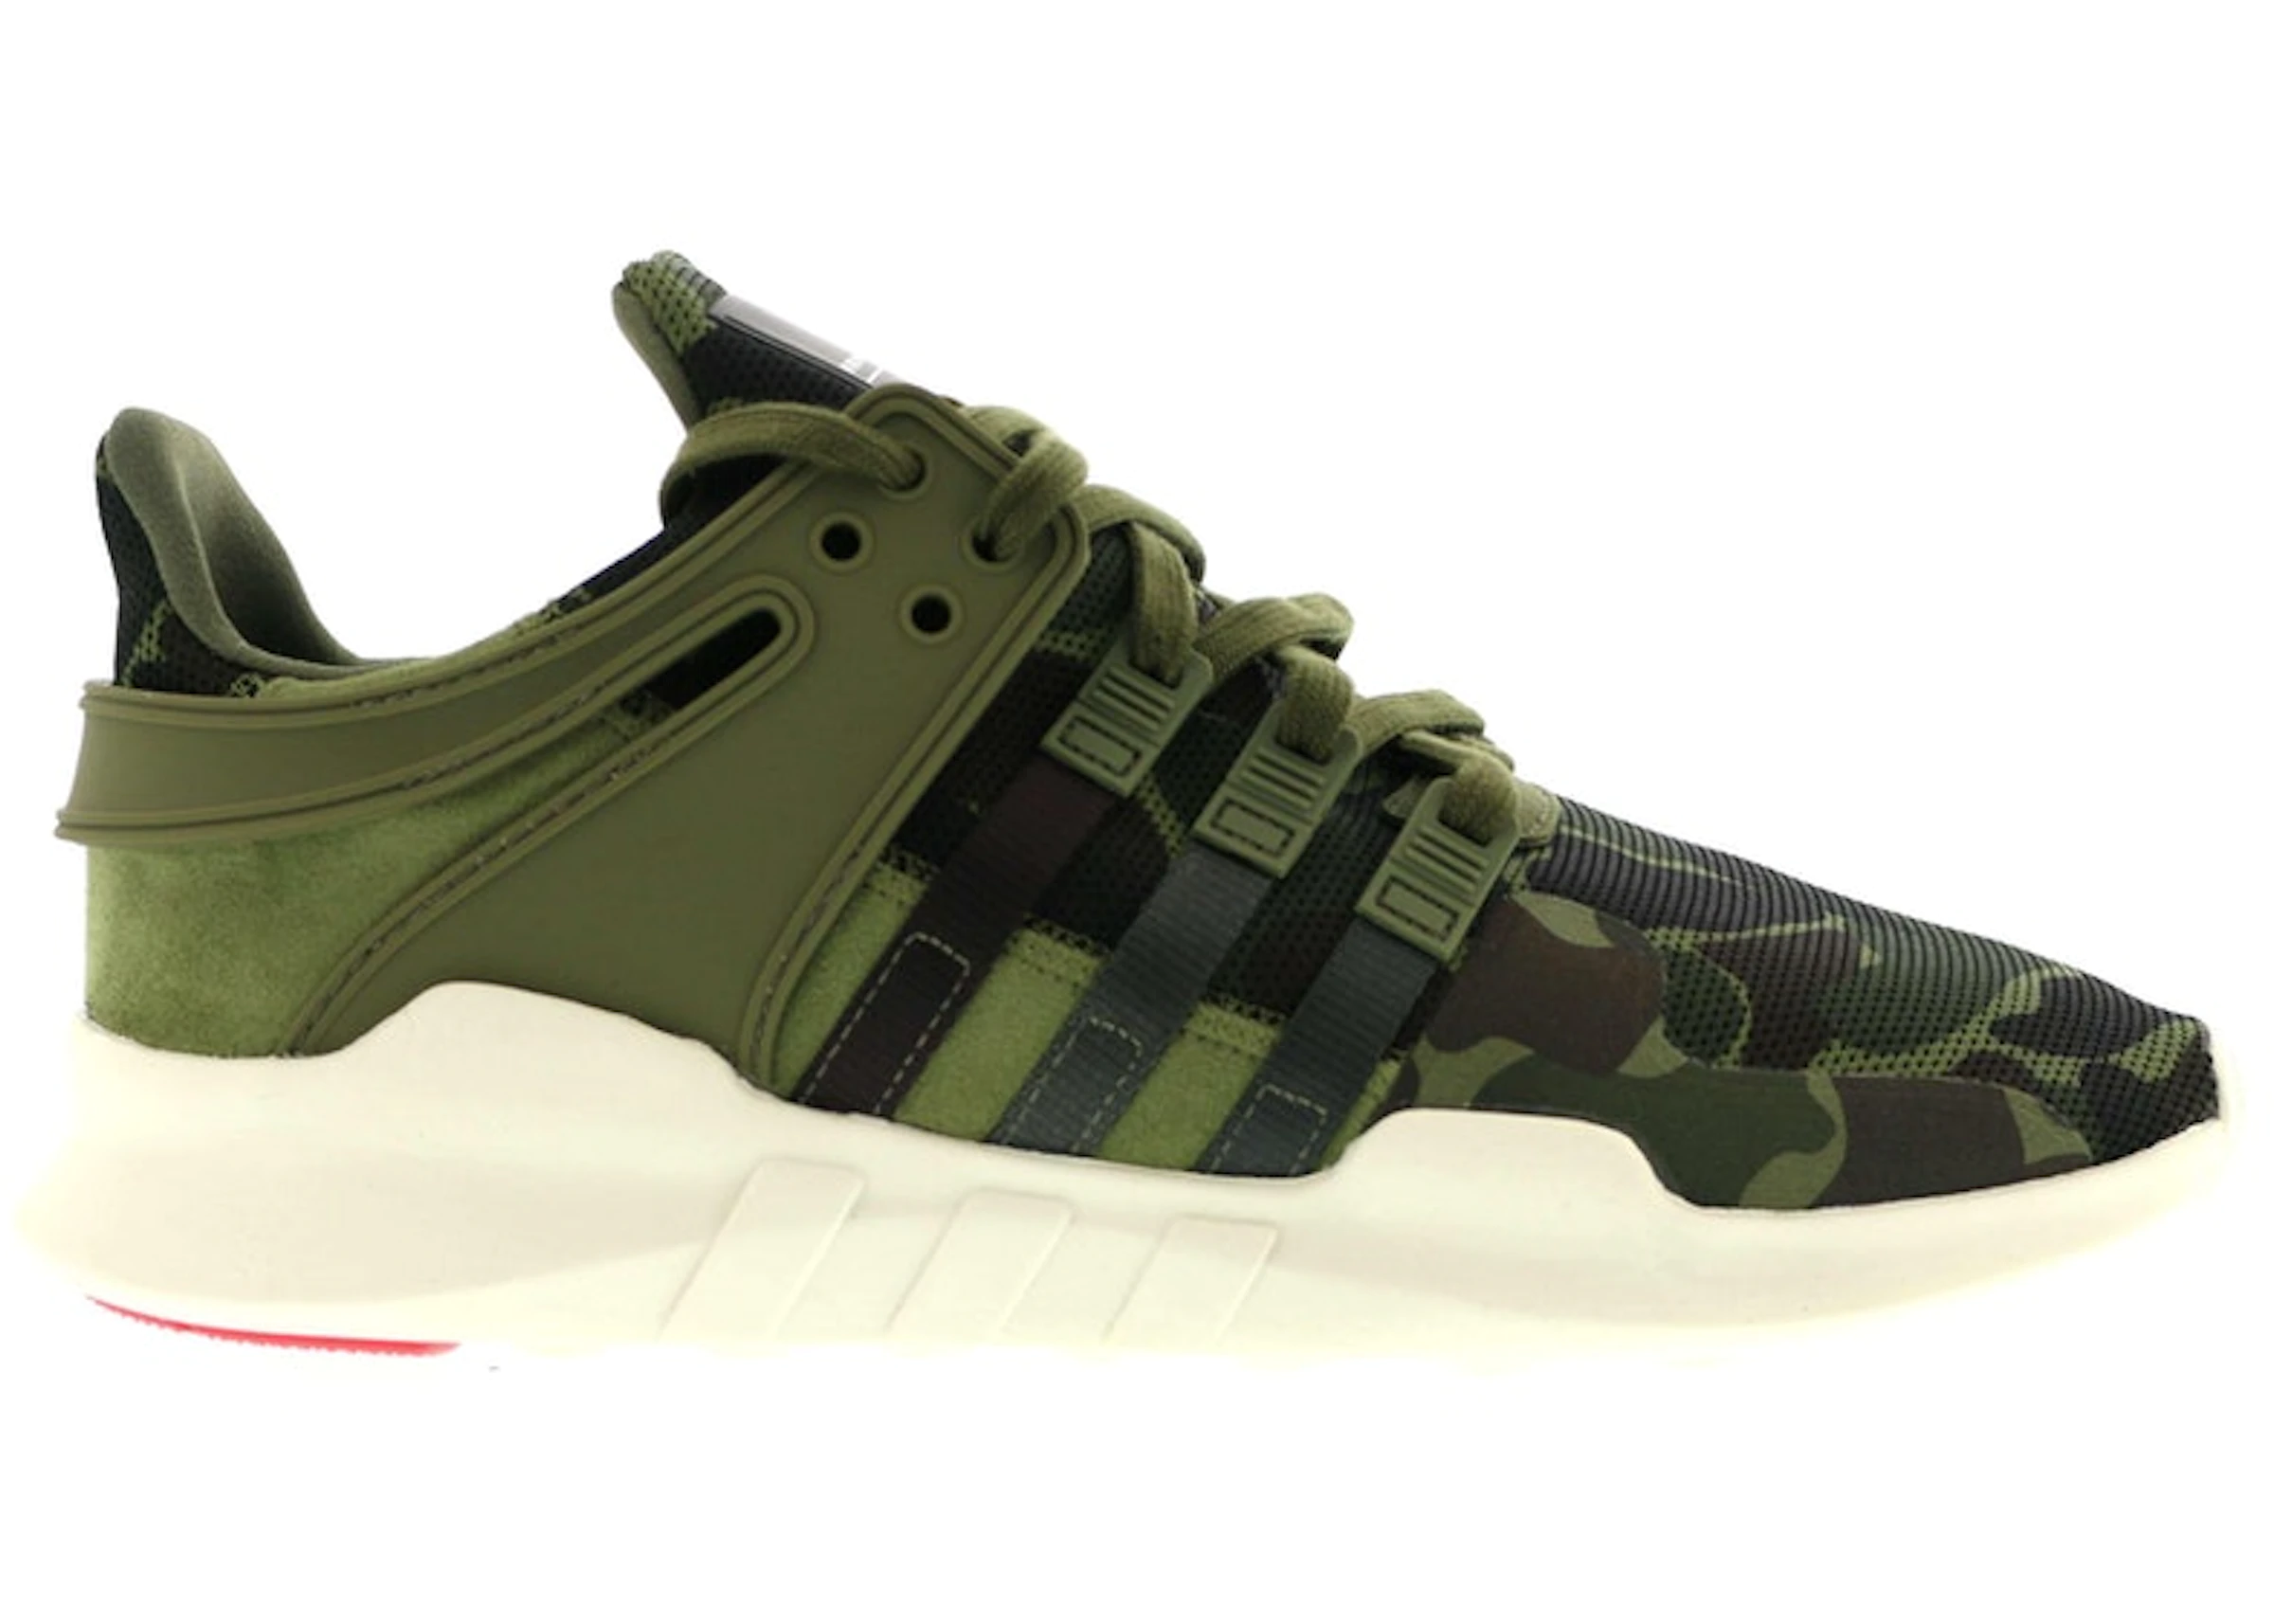 float silence the Internet adidas EQT Support ADV Camo Olive - BB1307 - US